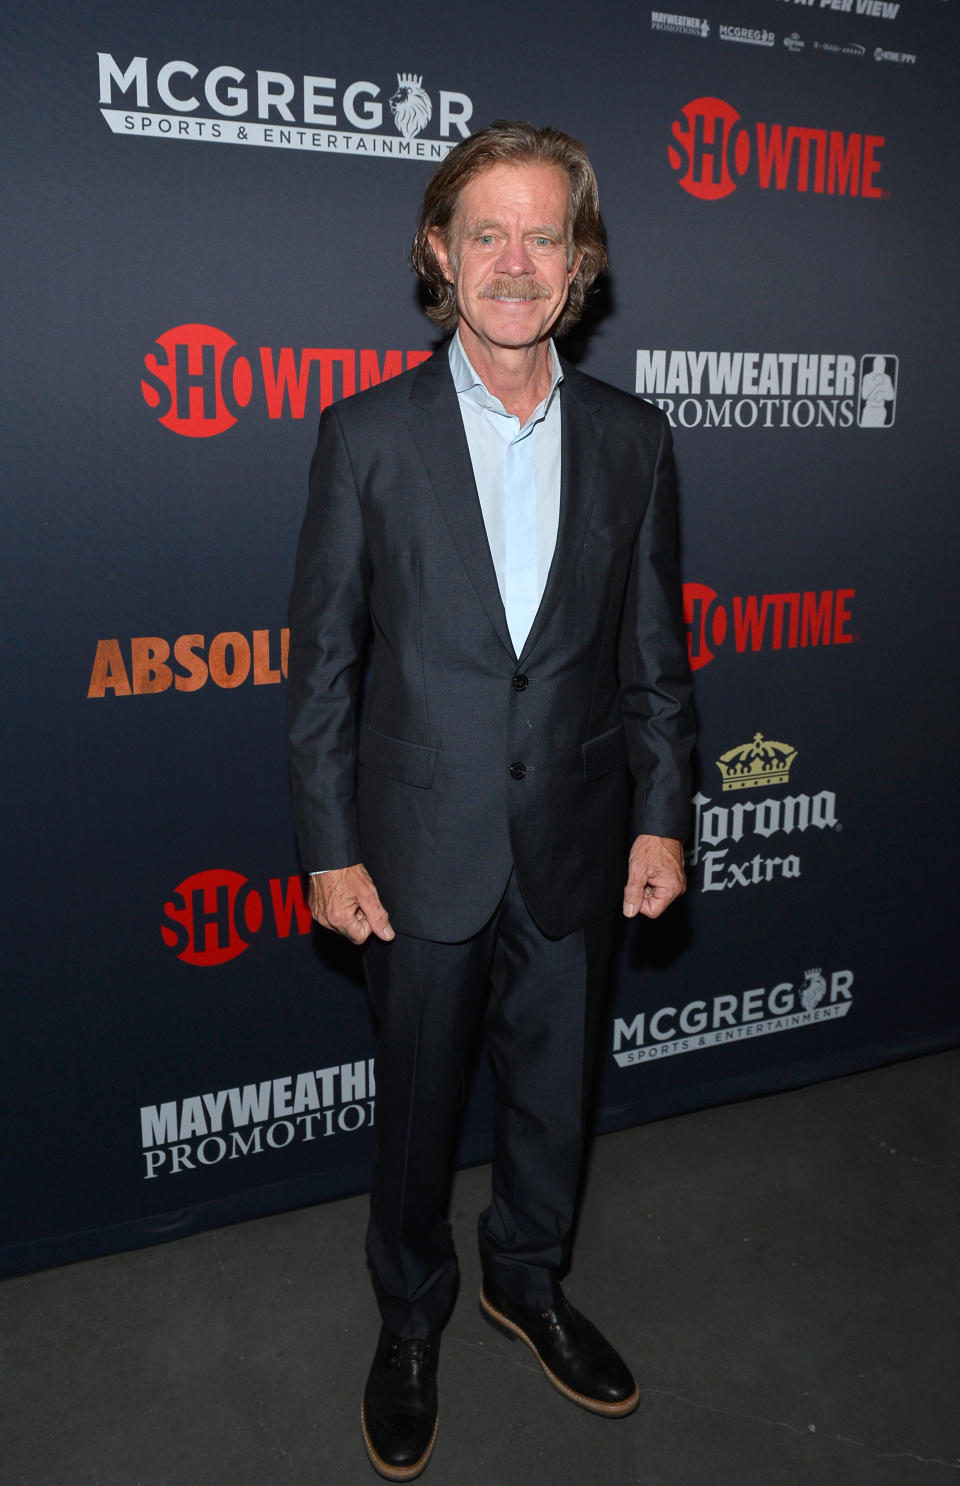 <p>Actor William H. Macy attends the Showtime, WME IME and Mayweather Promotions VIP Pre-Fight party for Mayweather vs. McGregor at T-Mobile Arena on August 26, 2017 in Las Vegas, Nevada. (Photo by Bryan Steffy/Getty Images for Showtime) </p>